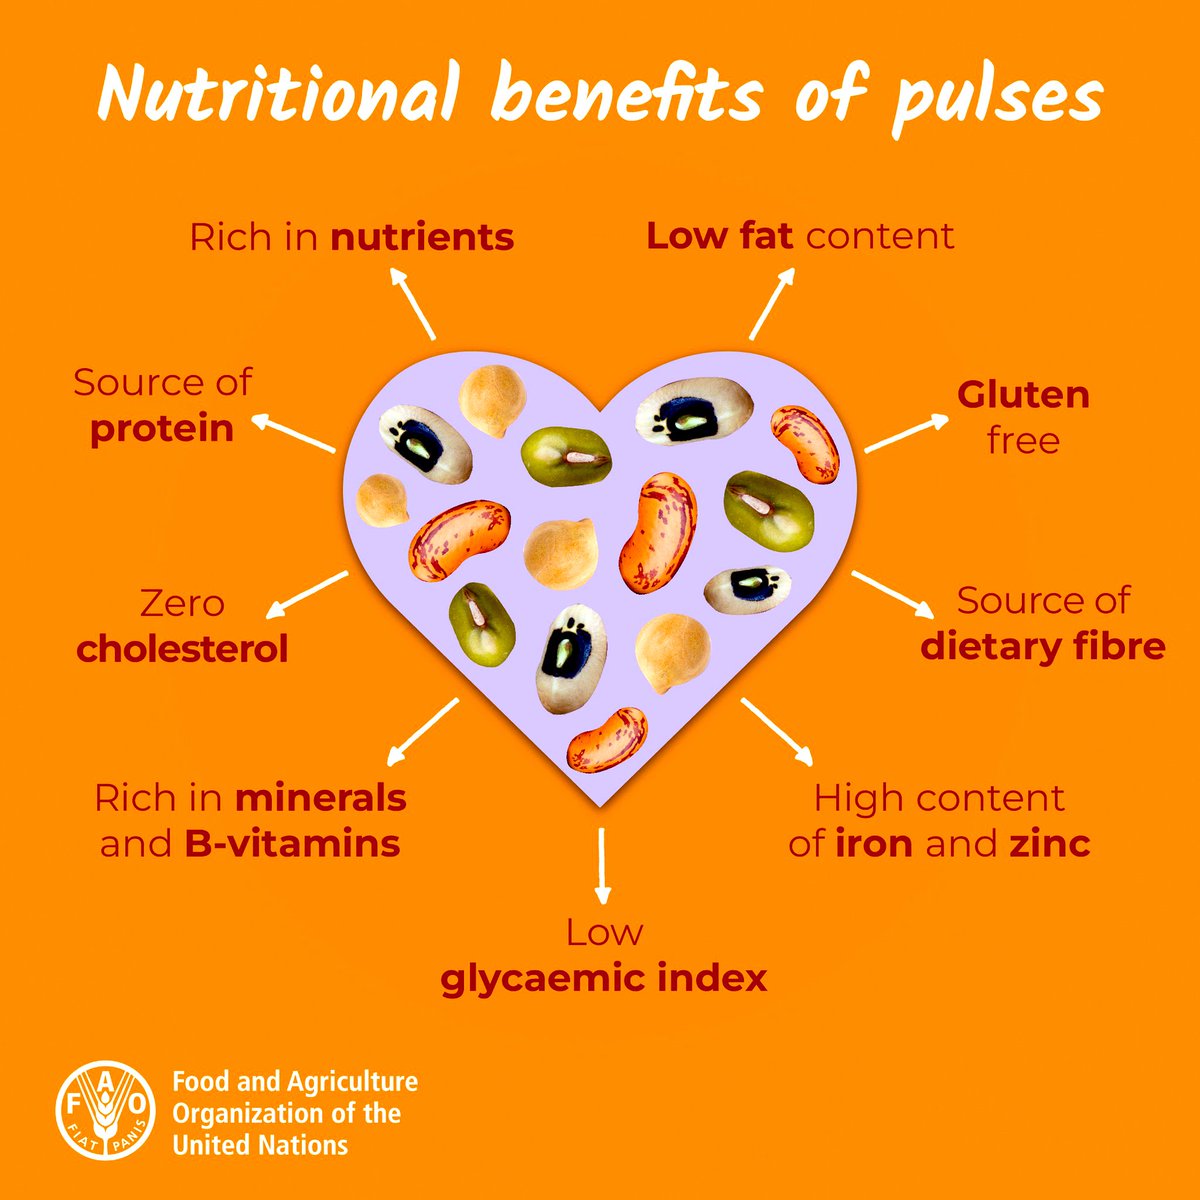 Pulses  are our delicious ally in achieving food security, and reducing malnutrition.

#WorldPulsesDay